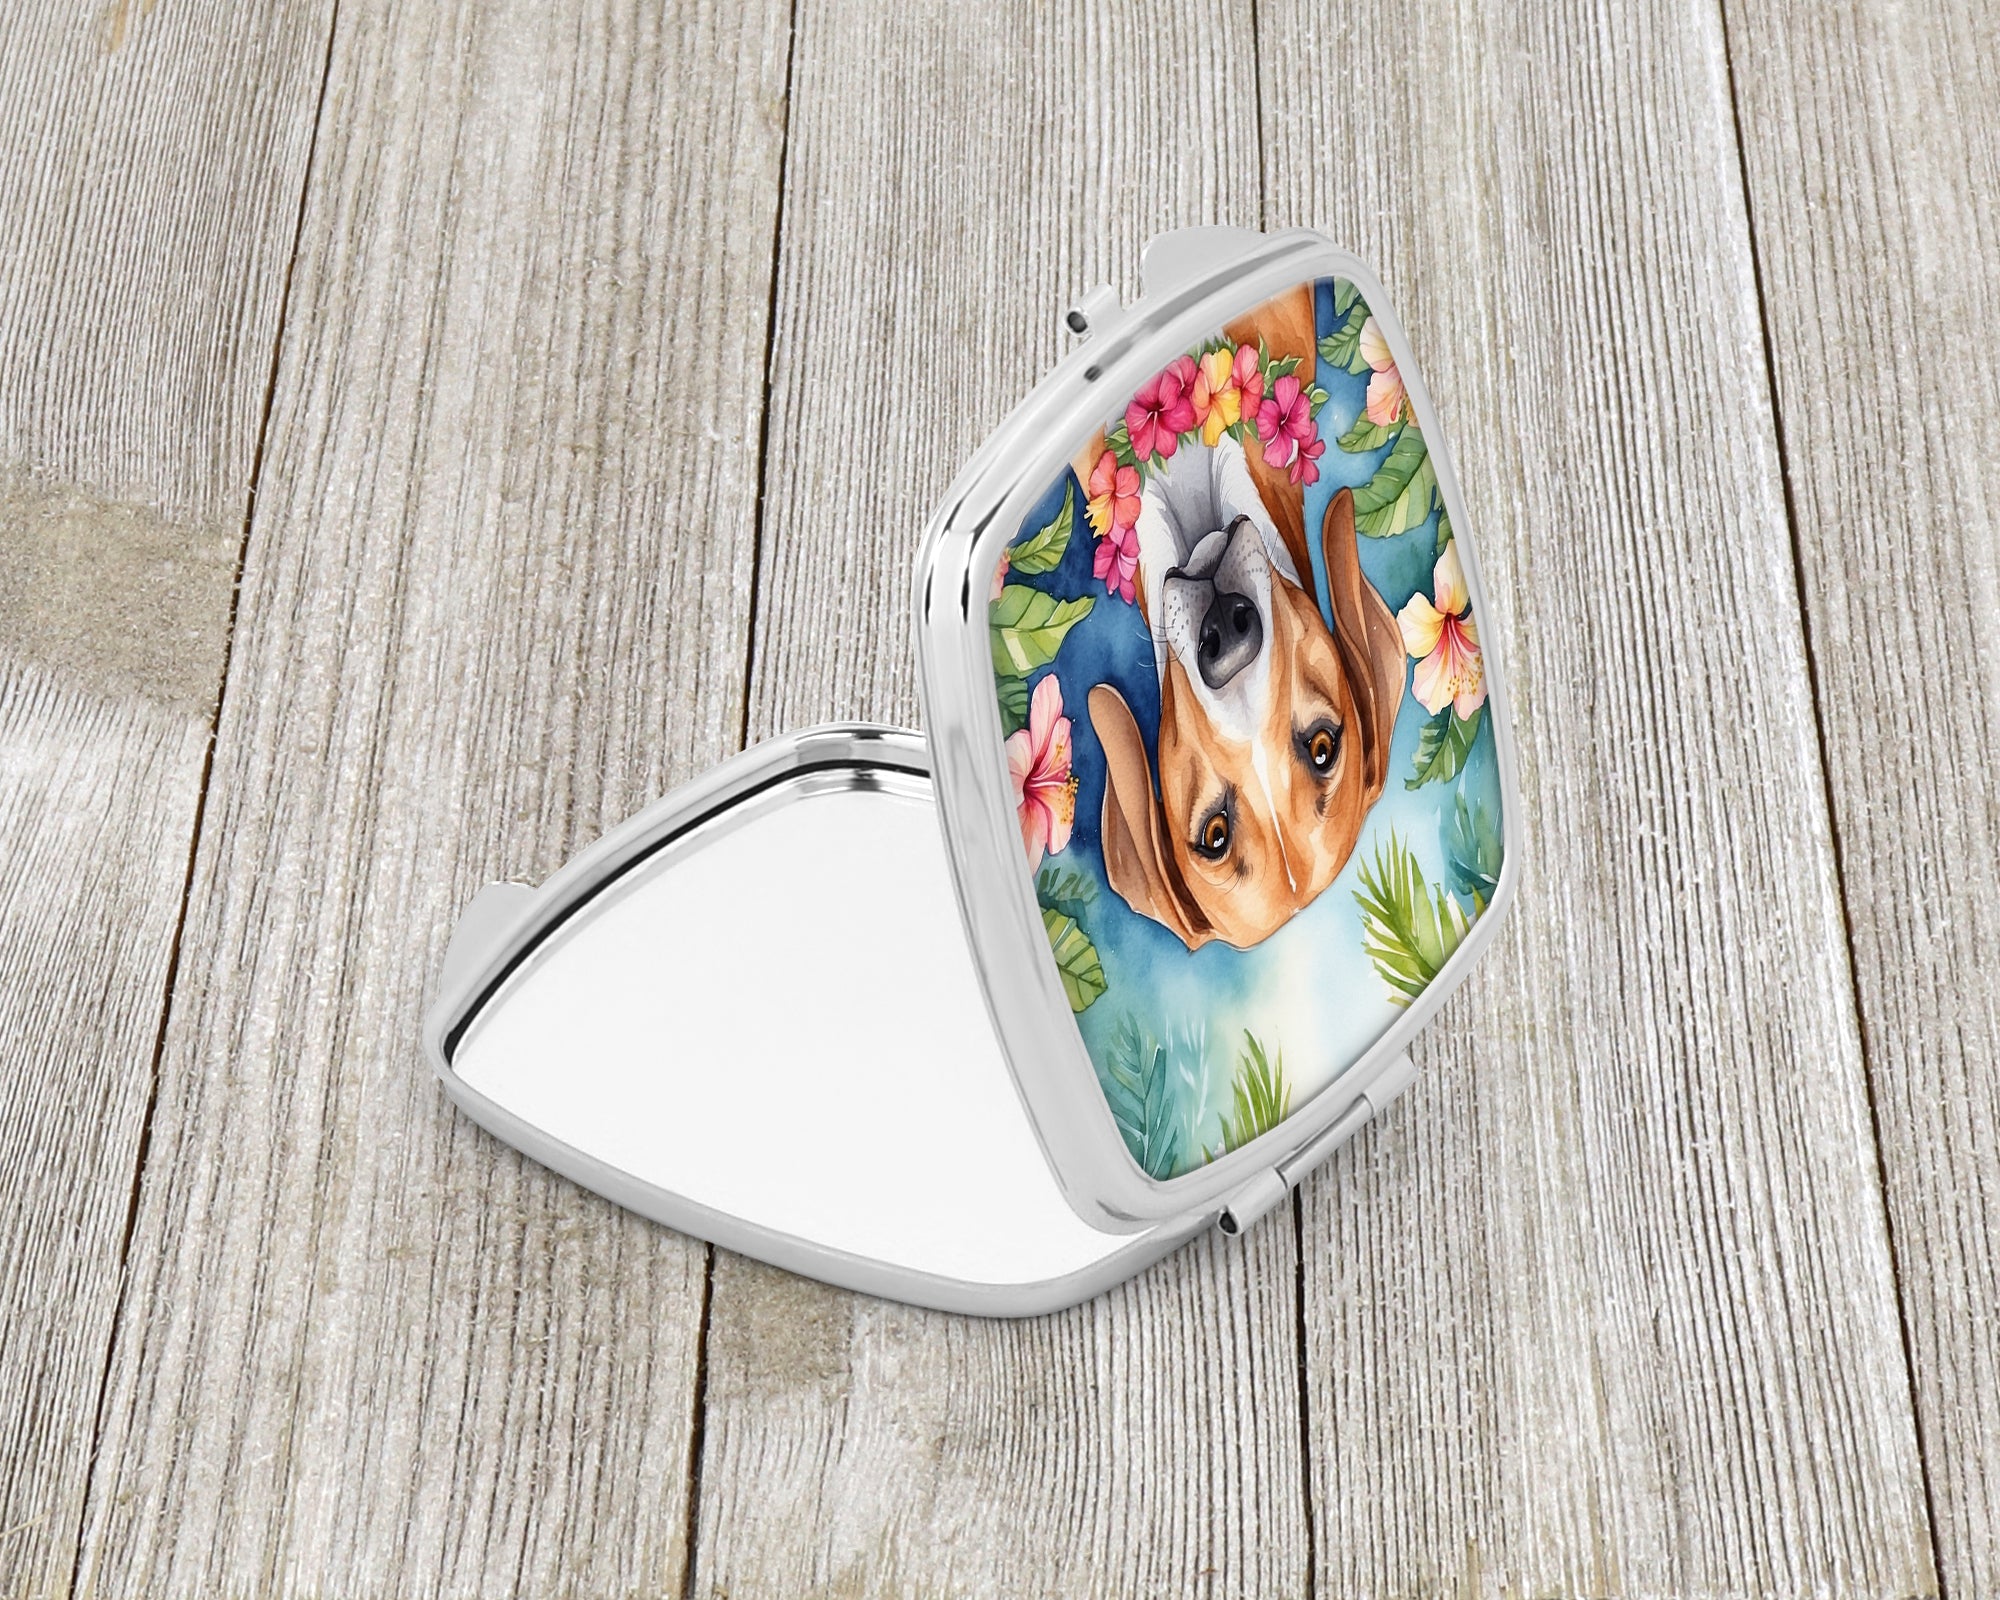 Buy this American Foxhound Luau Compact Mirror